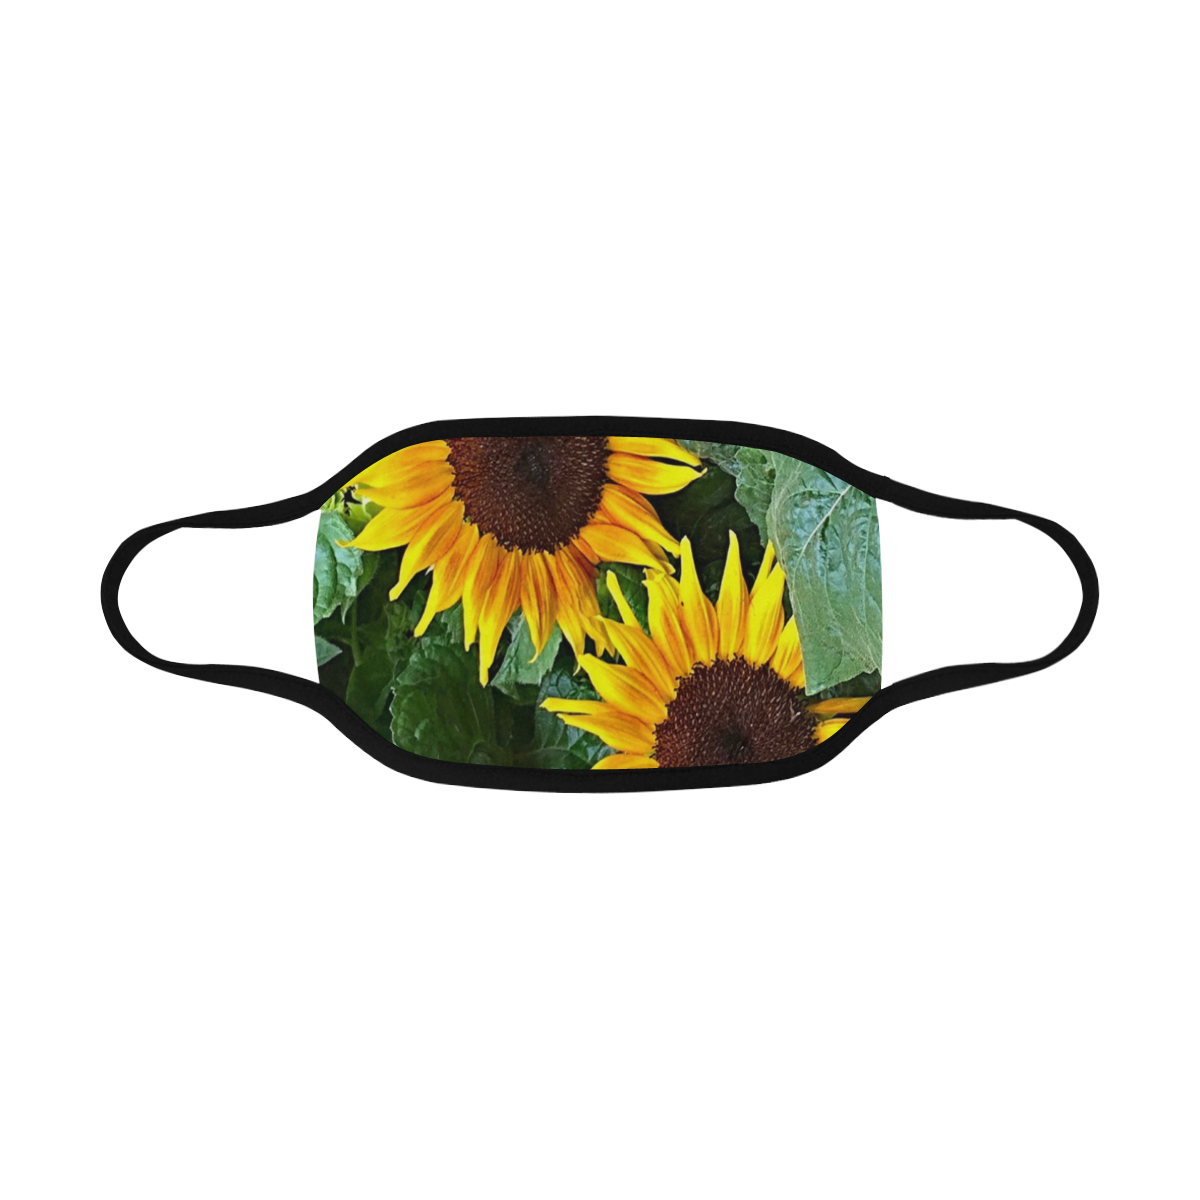 Sunny Flowers Mouth Mask